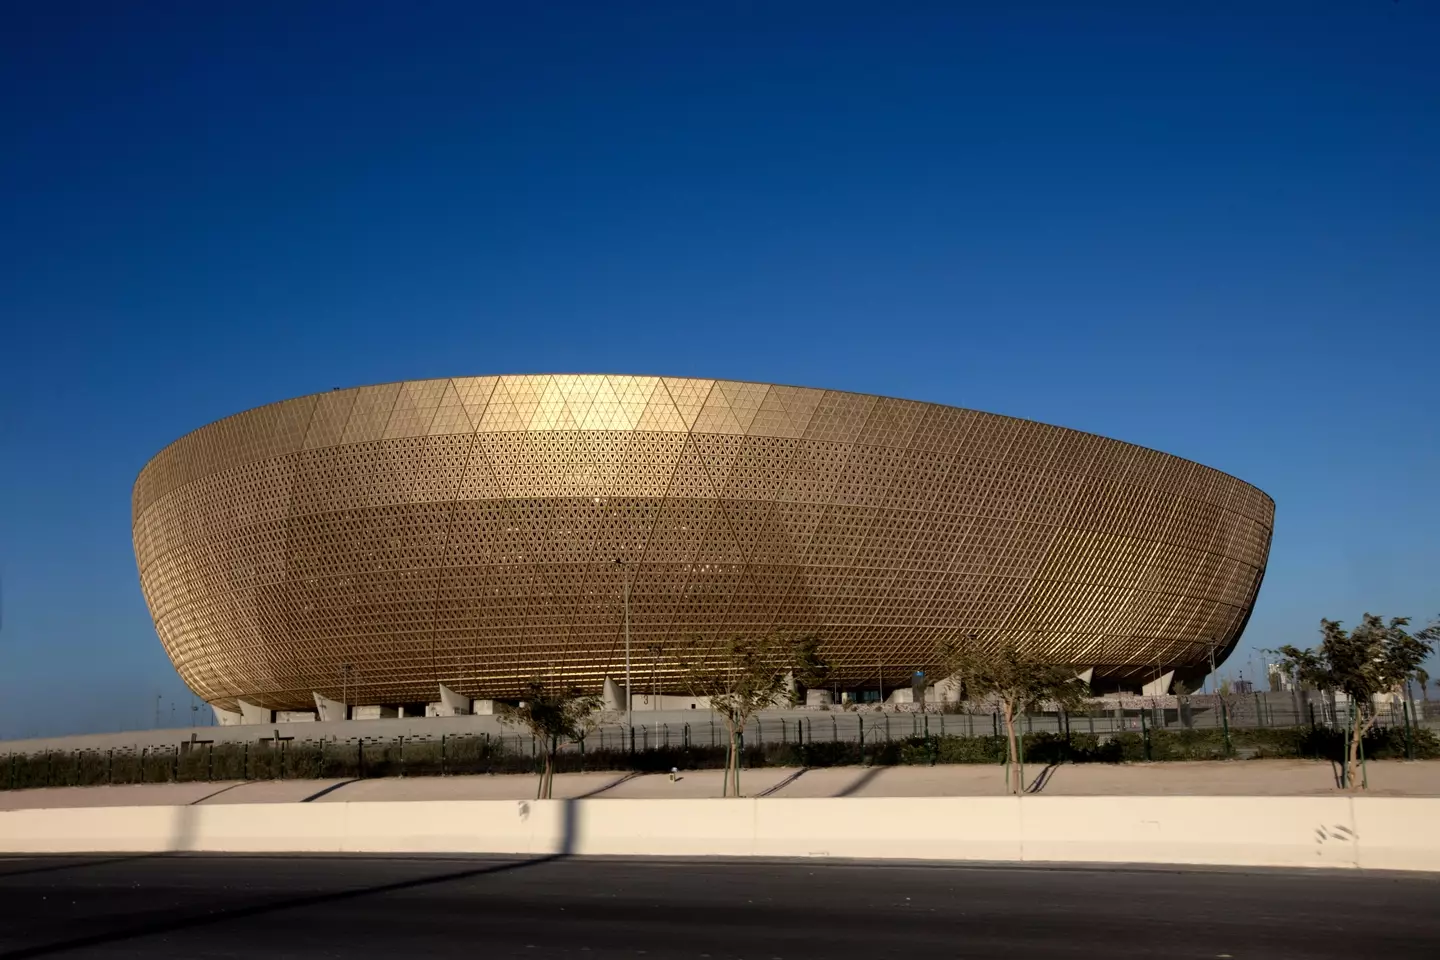 The stadium for the Qatar 2022 World Cup.